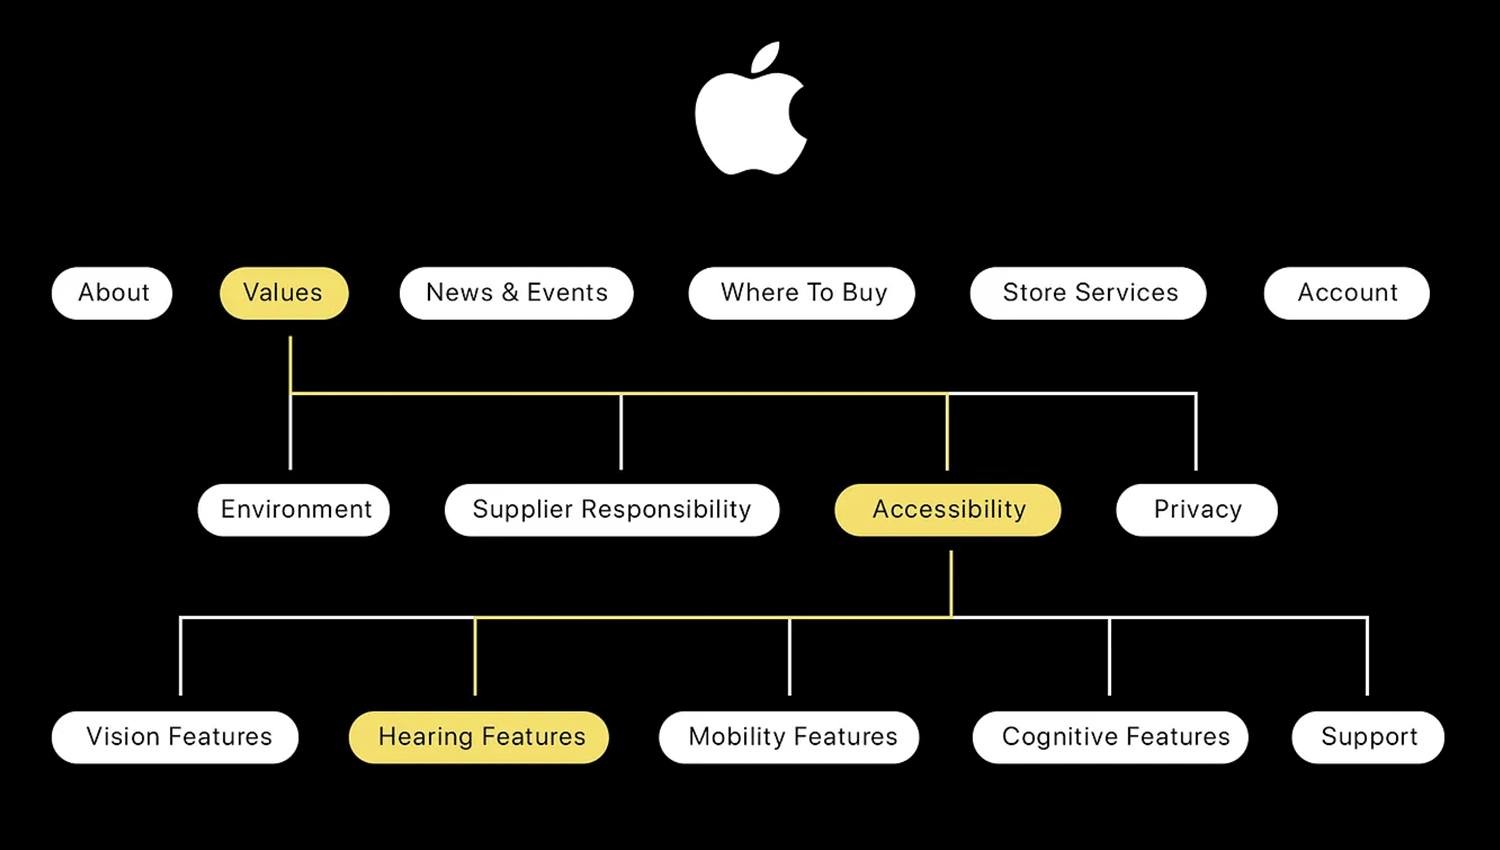 information architecture examples apple